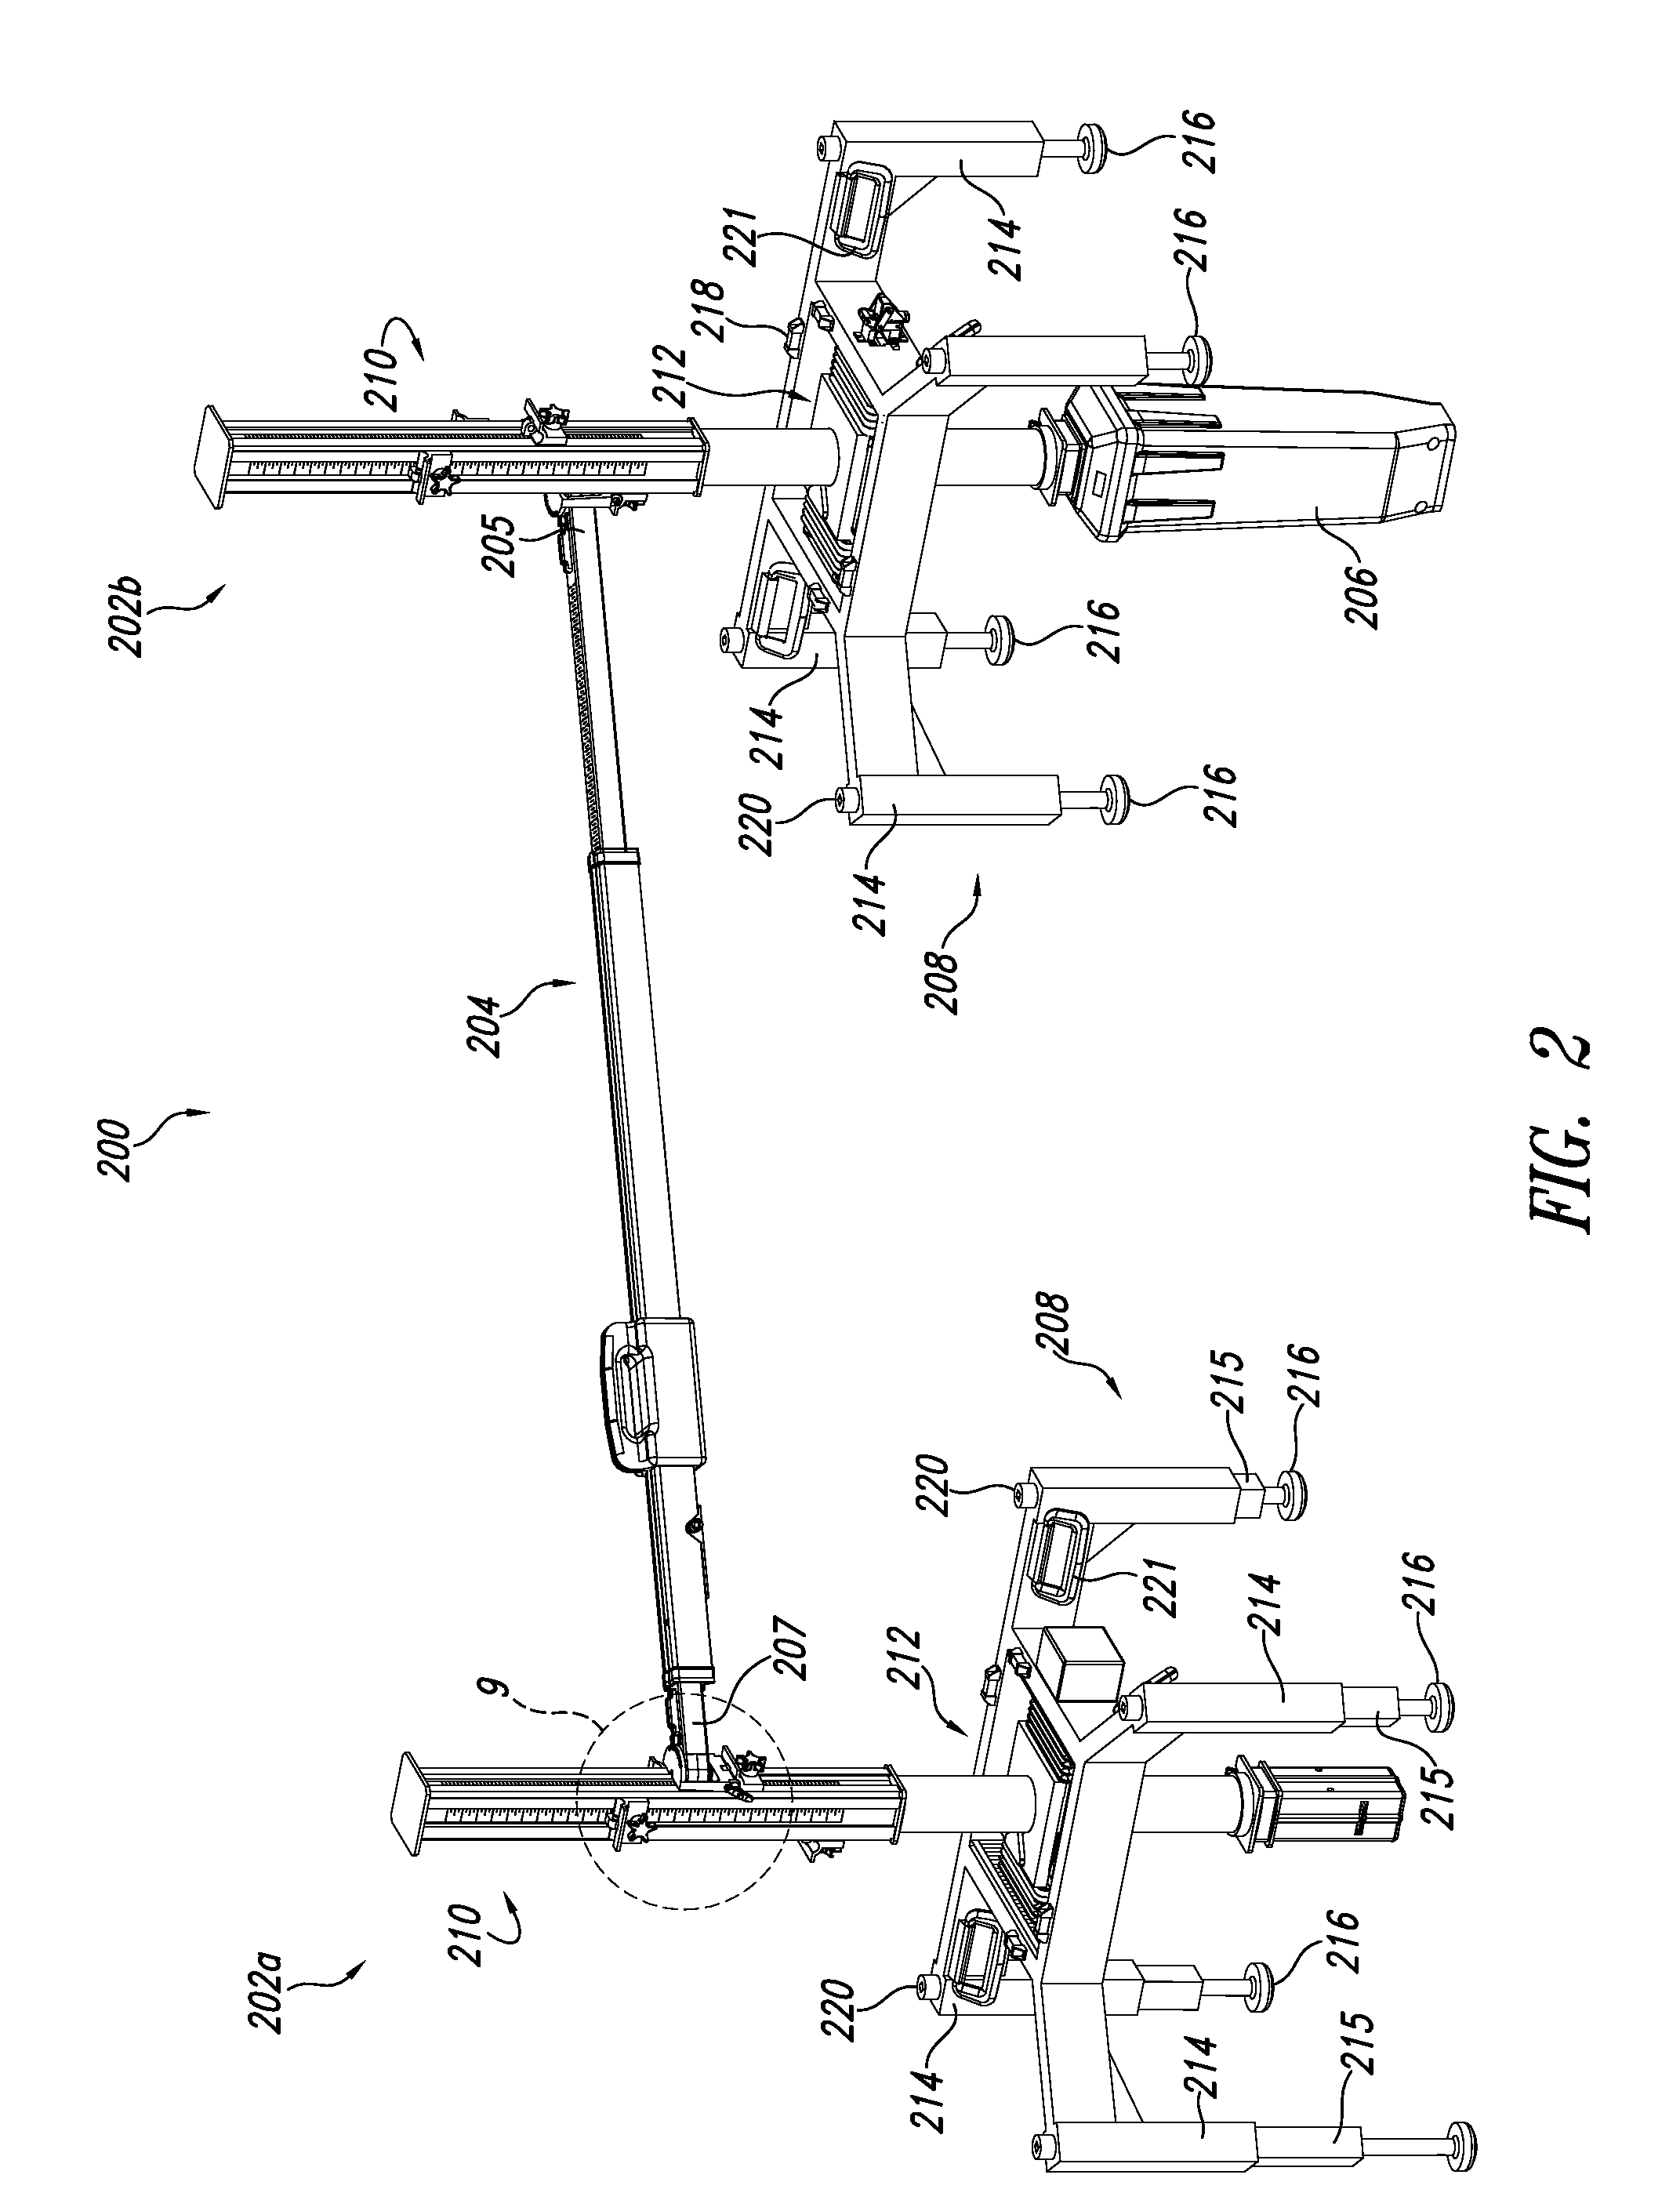 Post sleeve positioning apparatus and method